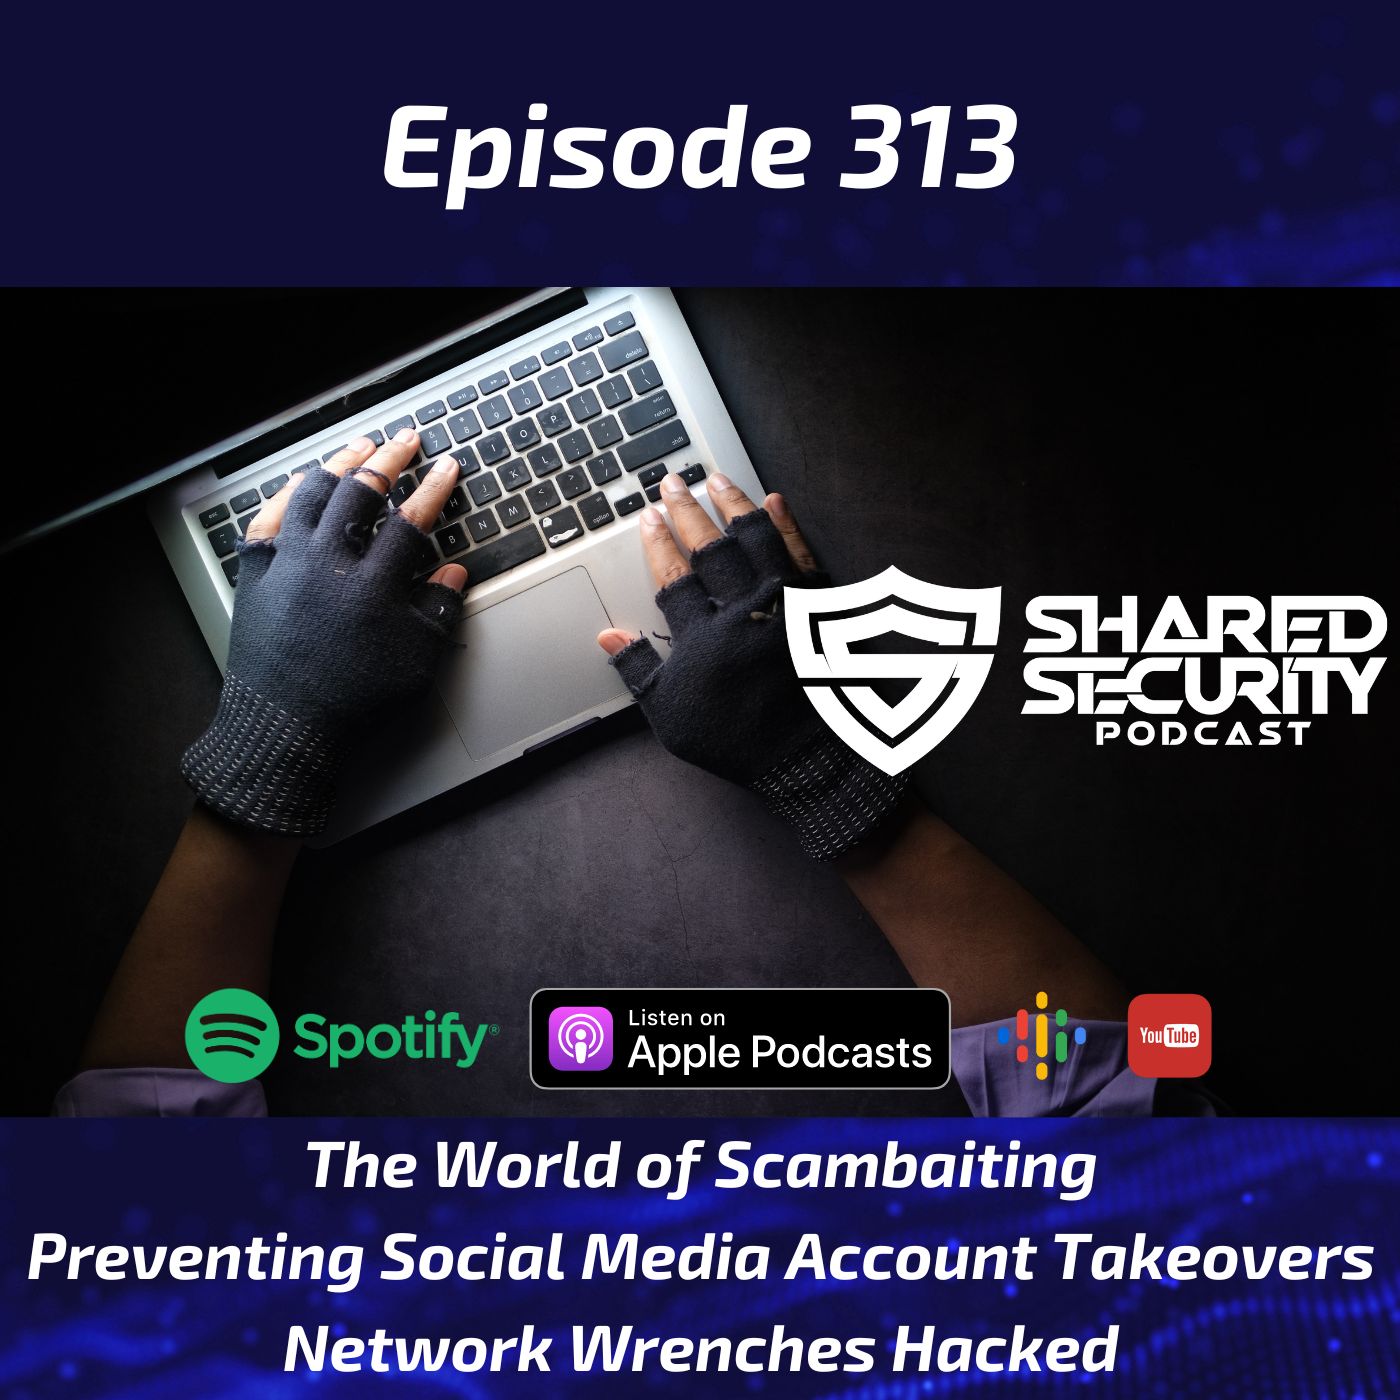 The World of Scambaiting, Preventing Social Media Account Takeovers, Network Wrenches Hacked